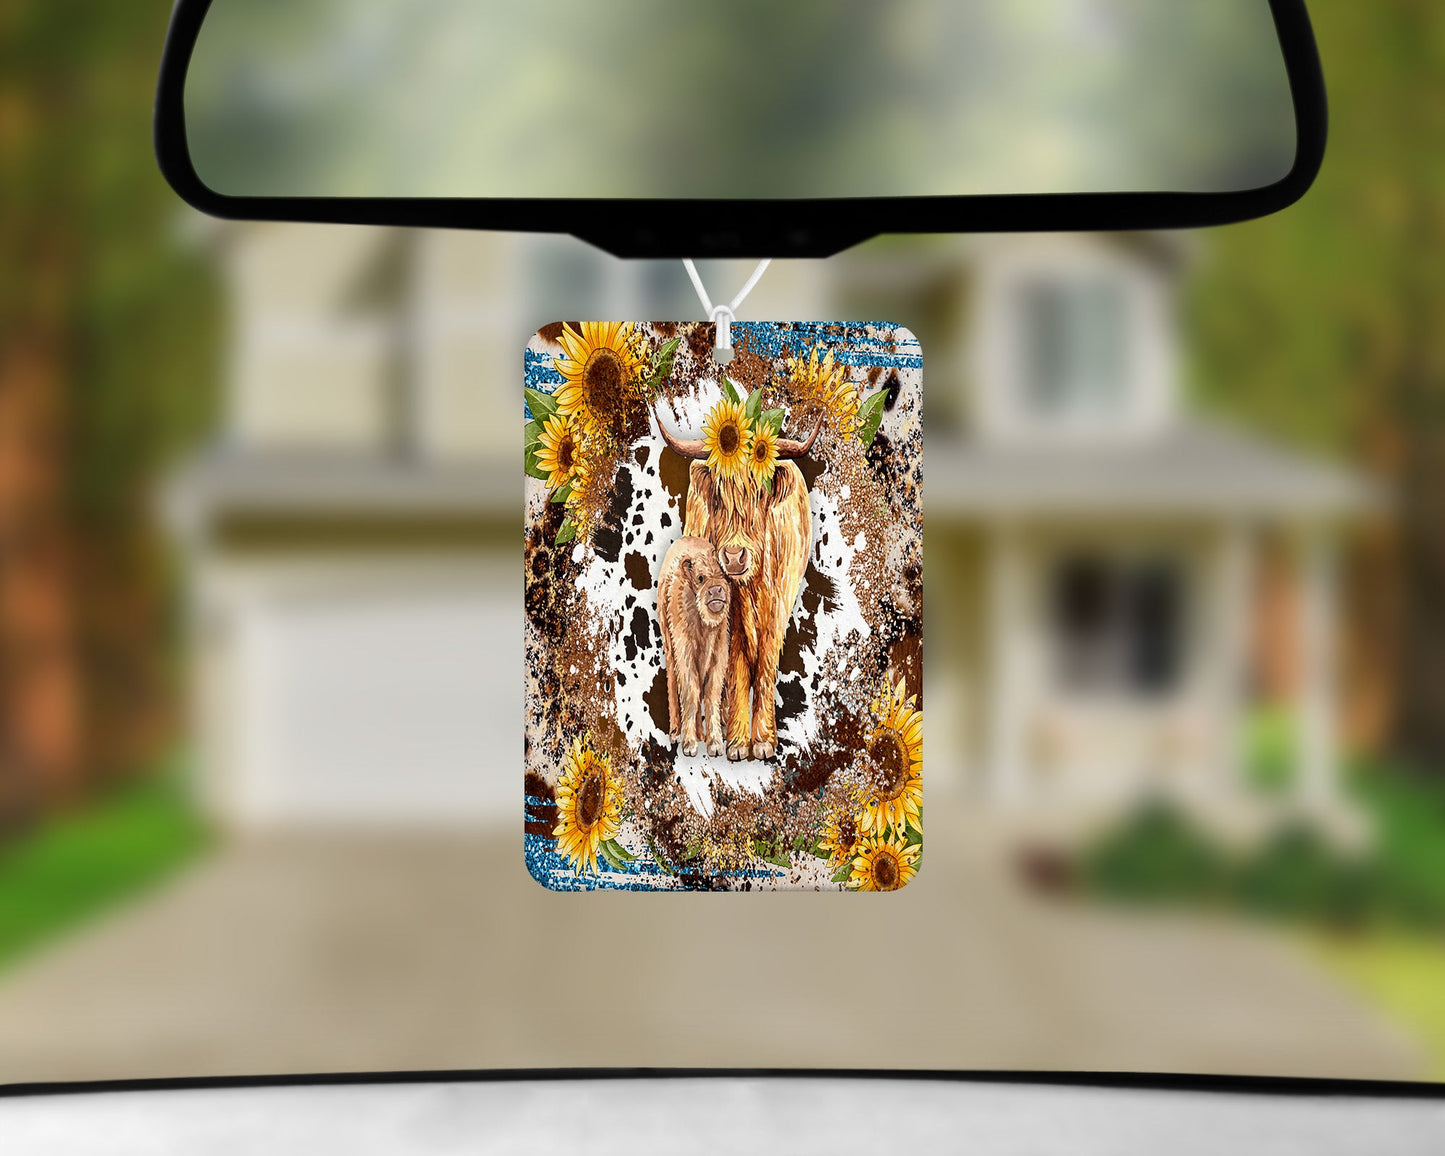 Highland Cow and Calf|Freshie|Includes Scent Bottle - Vehicle Air Freshener